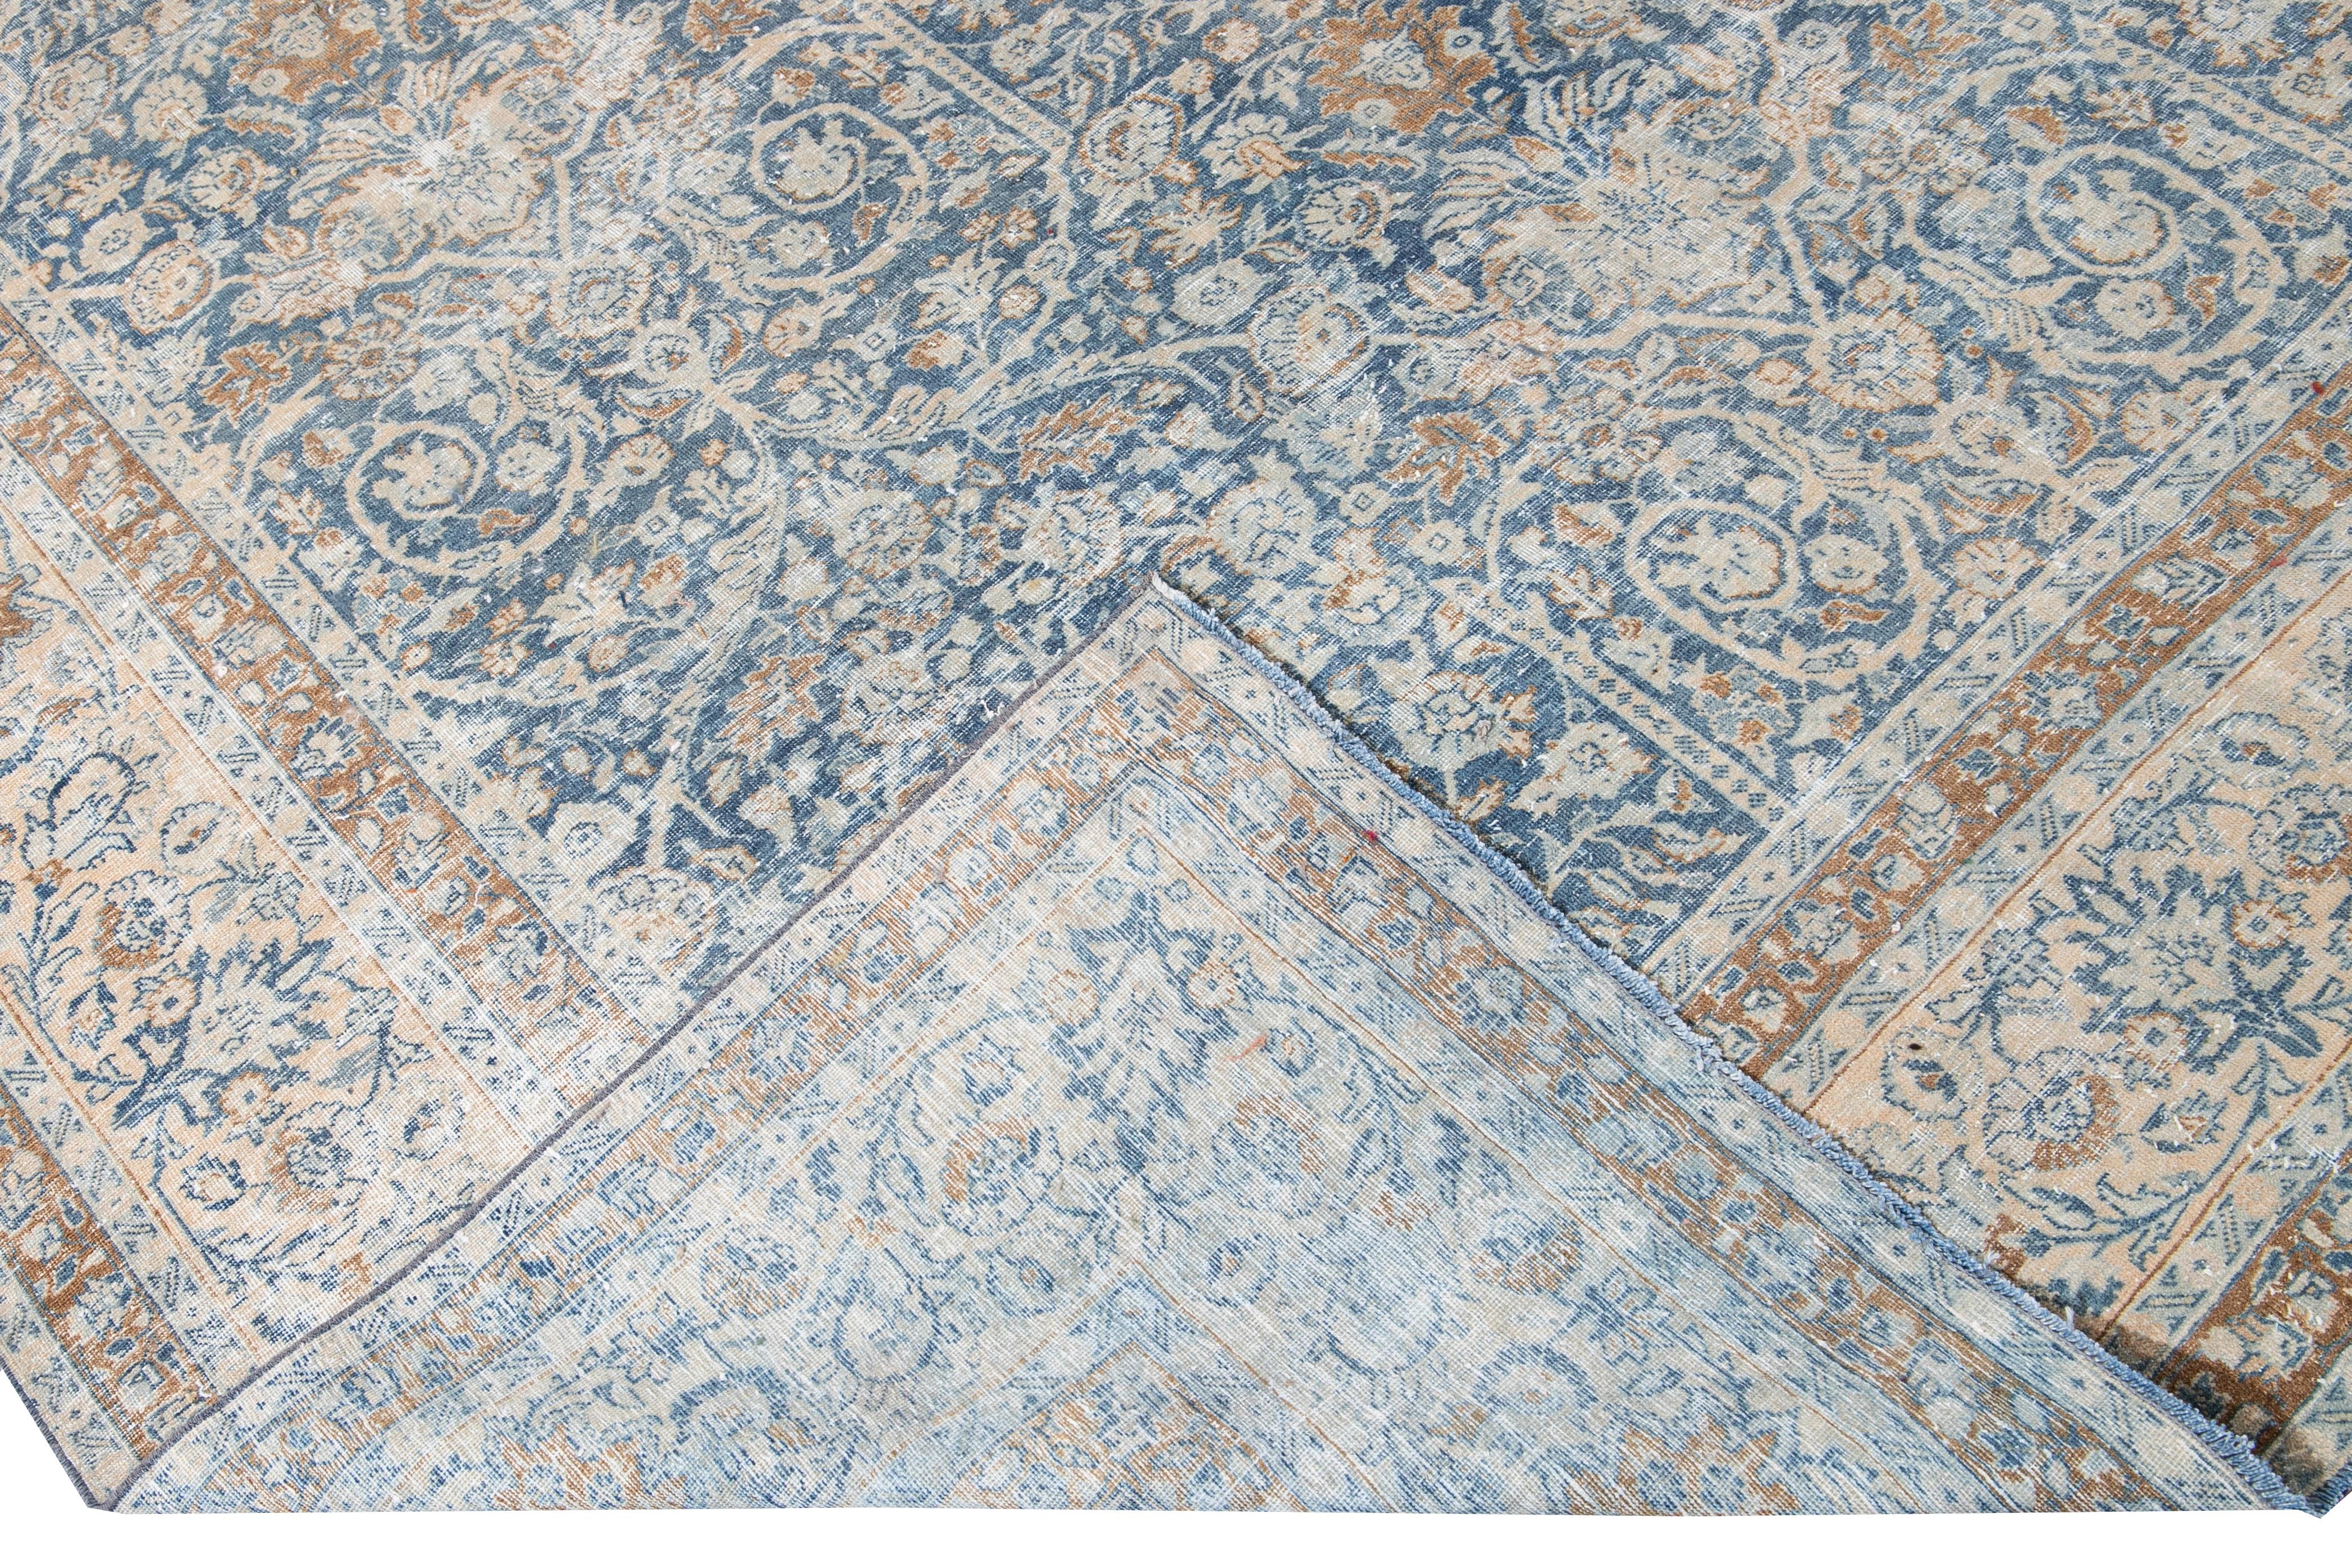 Beautiful antique oversize Tabriz hand-knotted wool rug with a blue field. This rug has a peach frame and brown accents in a gorgeous all-over distressed shabby chic floral design.

This rug measures: 13'2